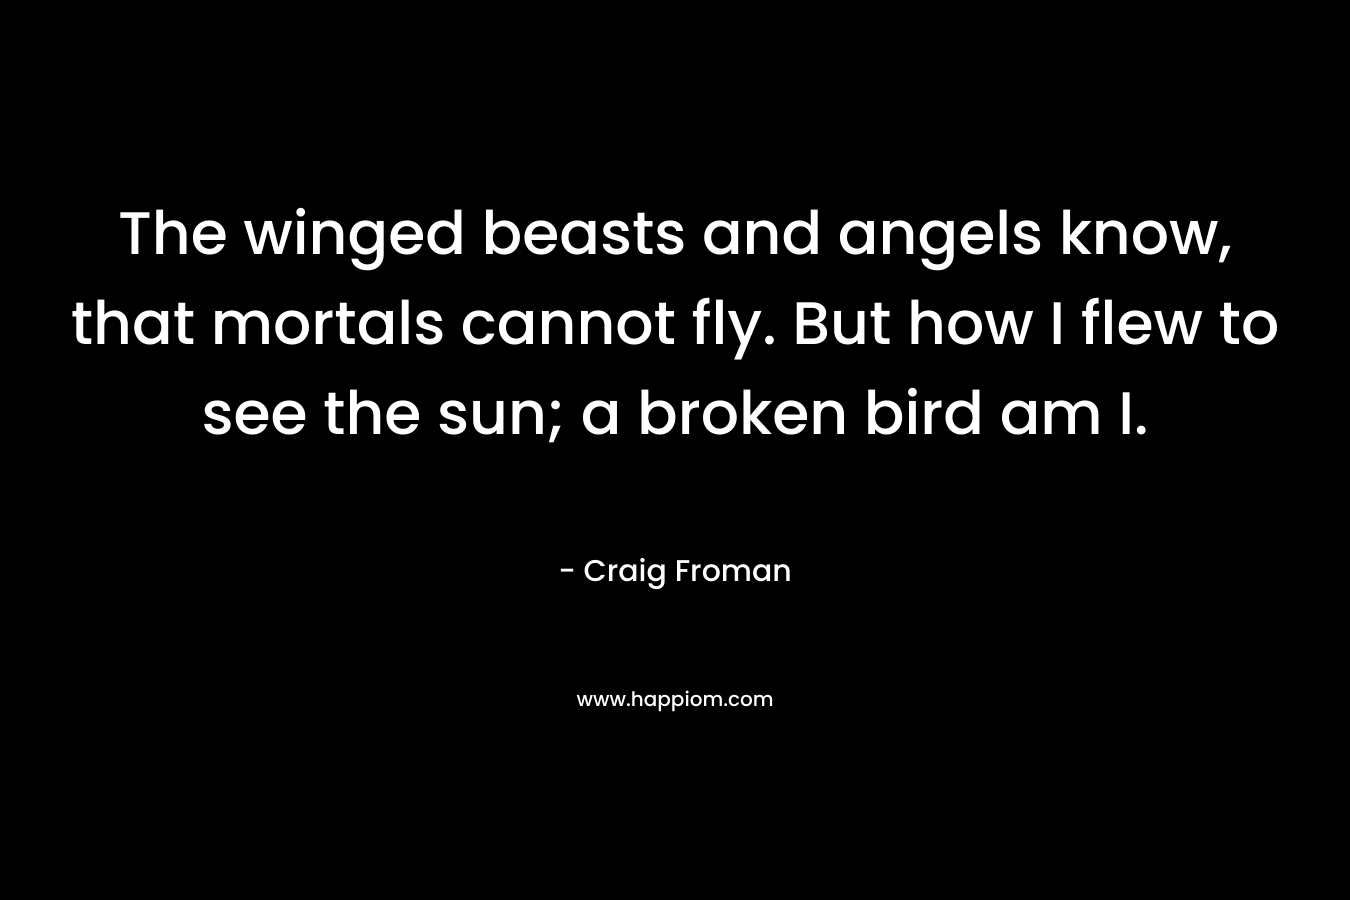 The winged beasts and angels know, that mortals cannot fly. But how I flew to see the sun; a broken bird am I. – Craig Froman